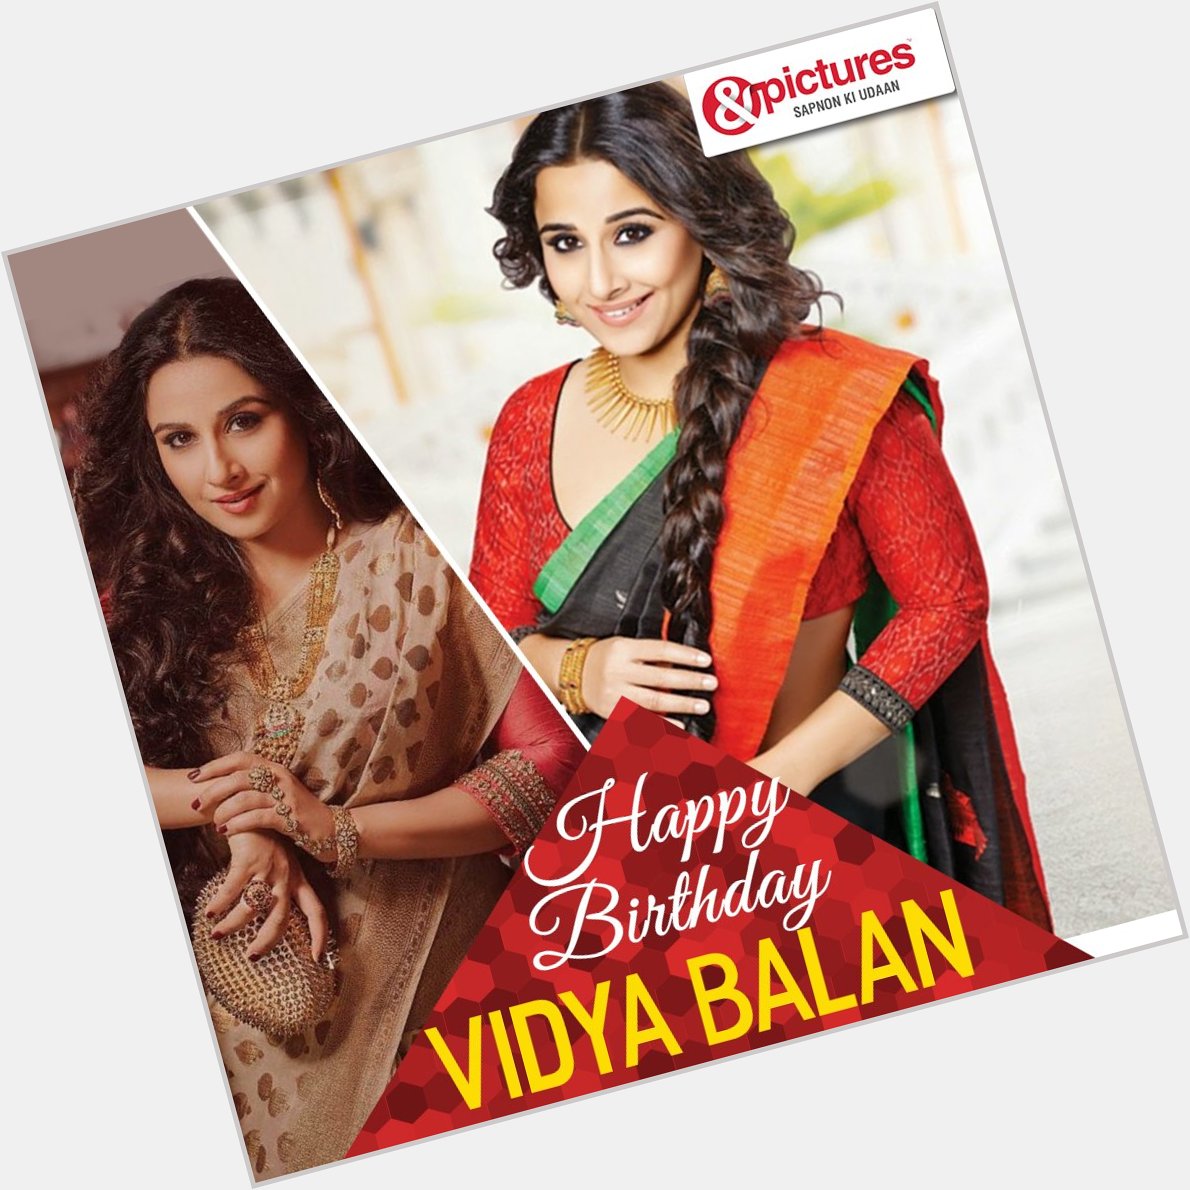 Wishing the extremely talented  and graceful actress a very Happy Birthday! 